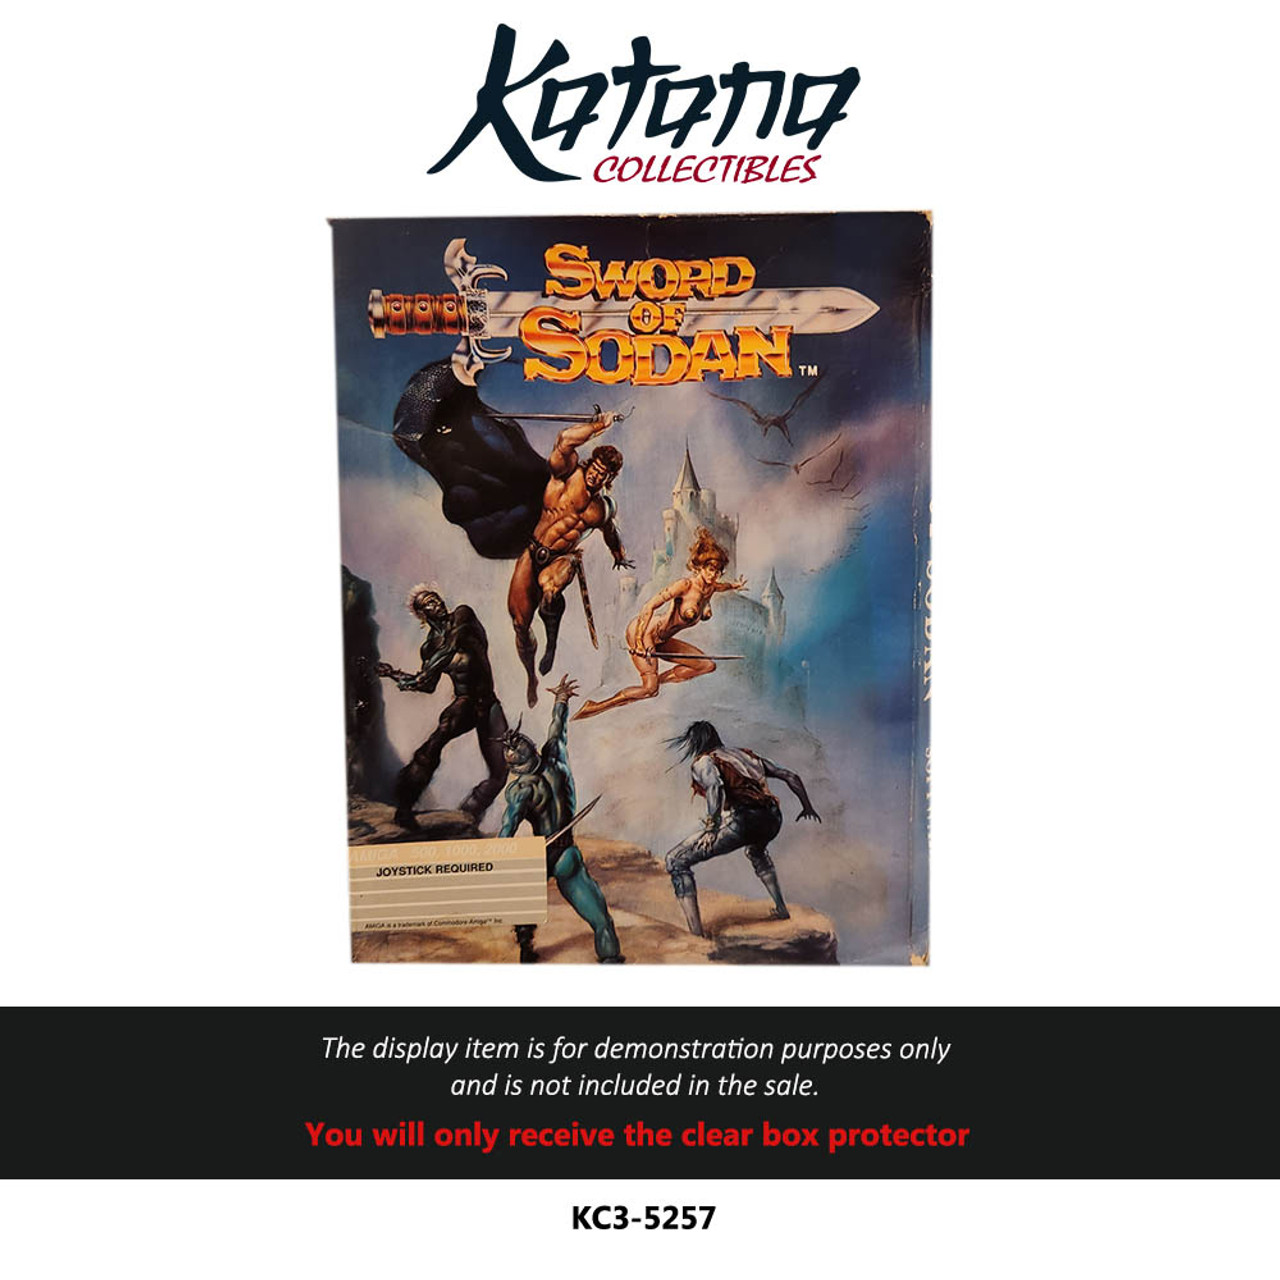 Katana Collectibles Protector For Sword of Sodan for Amiga by Discovery Software